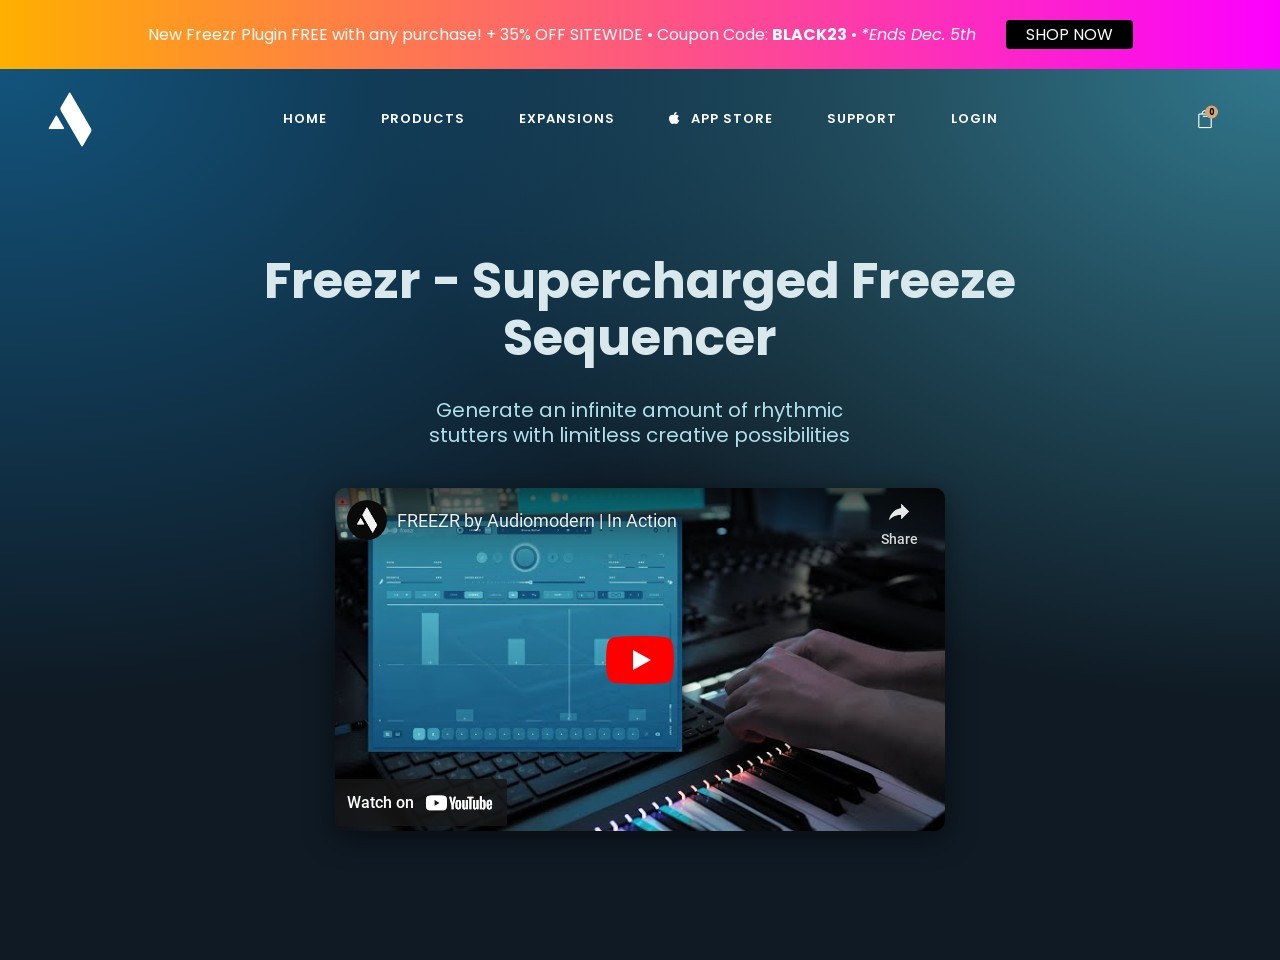 FREEZR by Audiomodern | Supercharged Freeze Sequencer